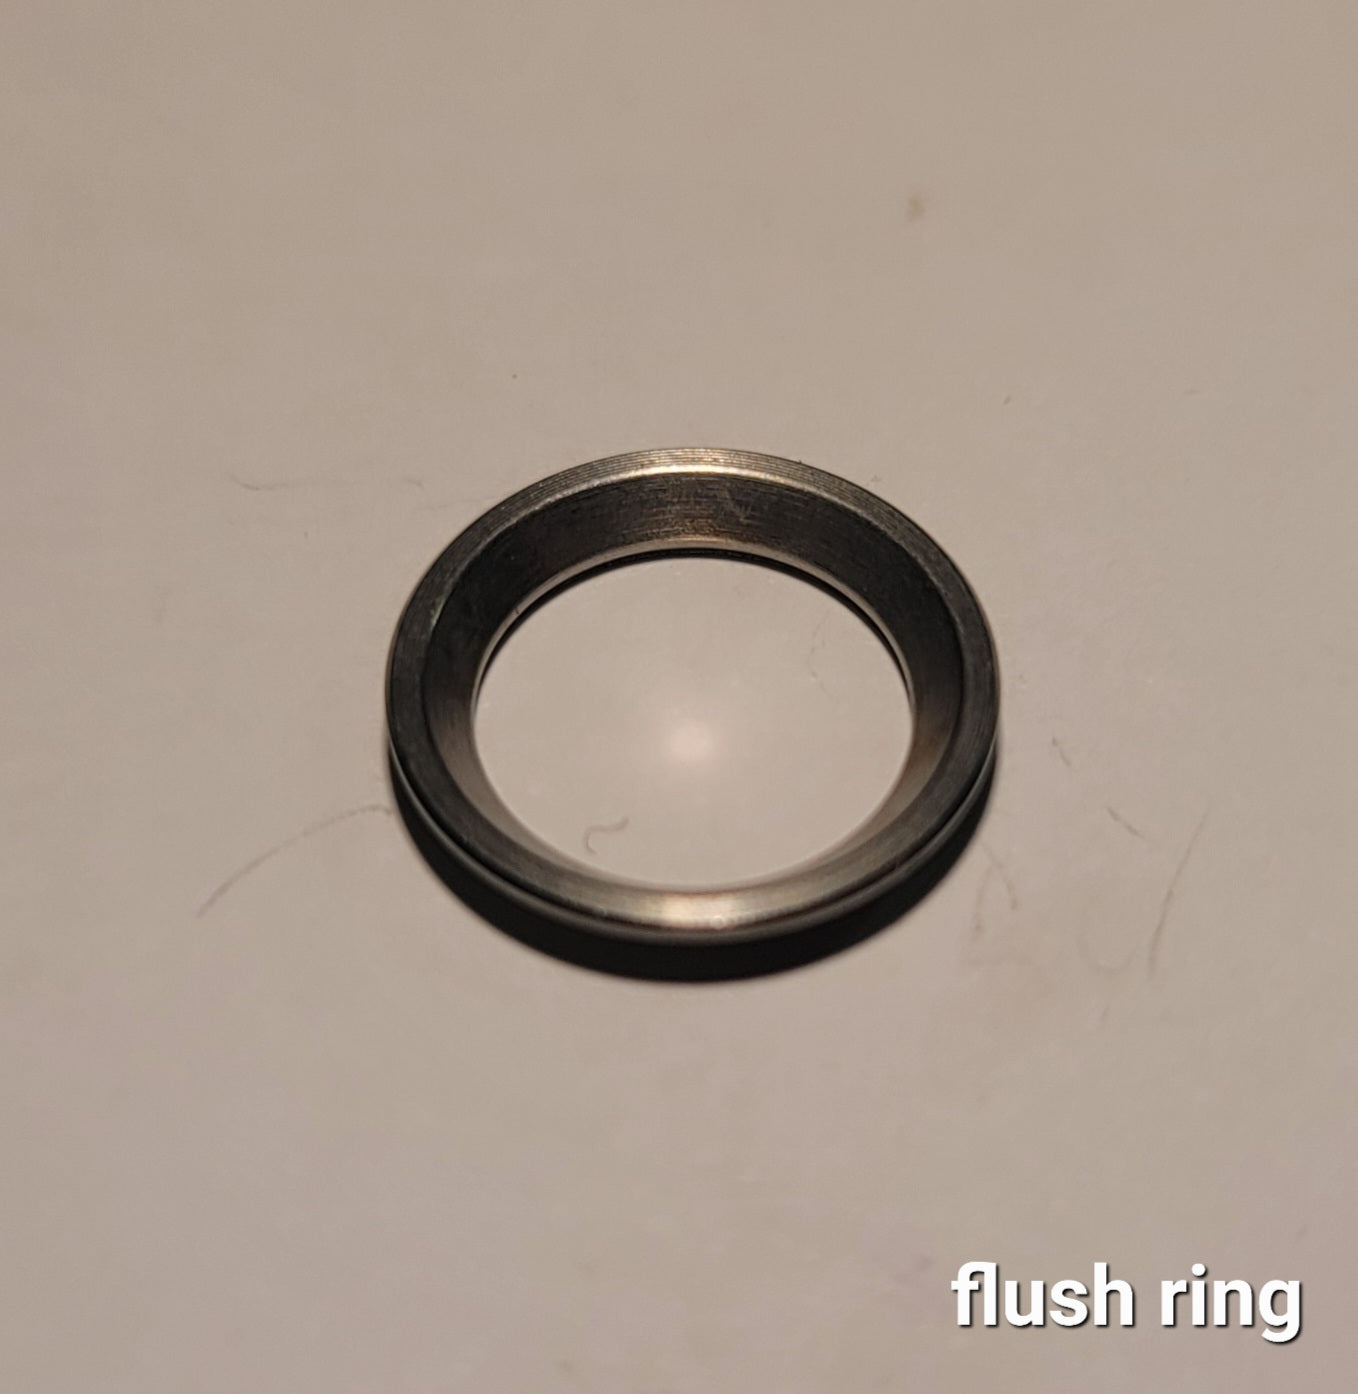 Emisar/Noctigon replacement Switch Ring/Button STAINLESS FLAT